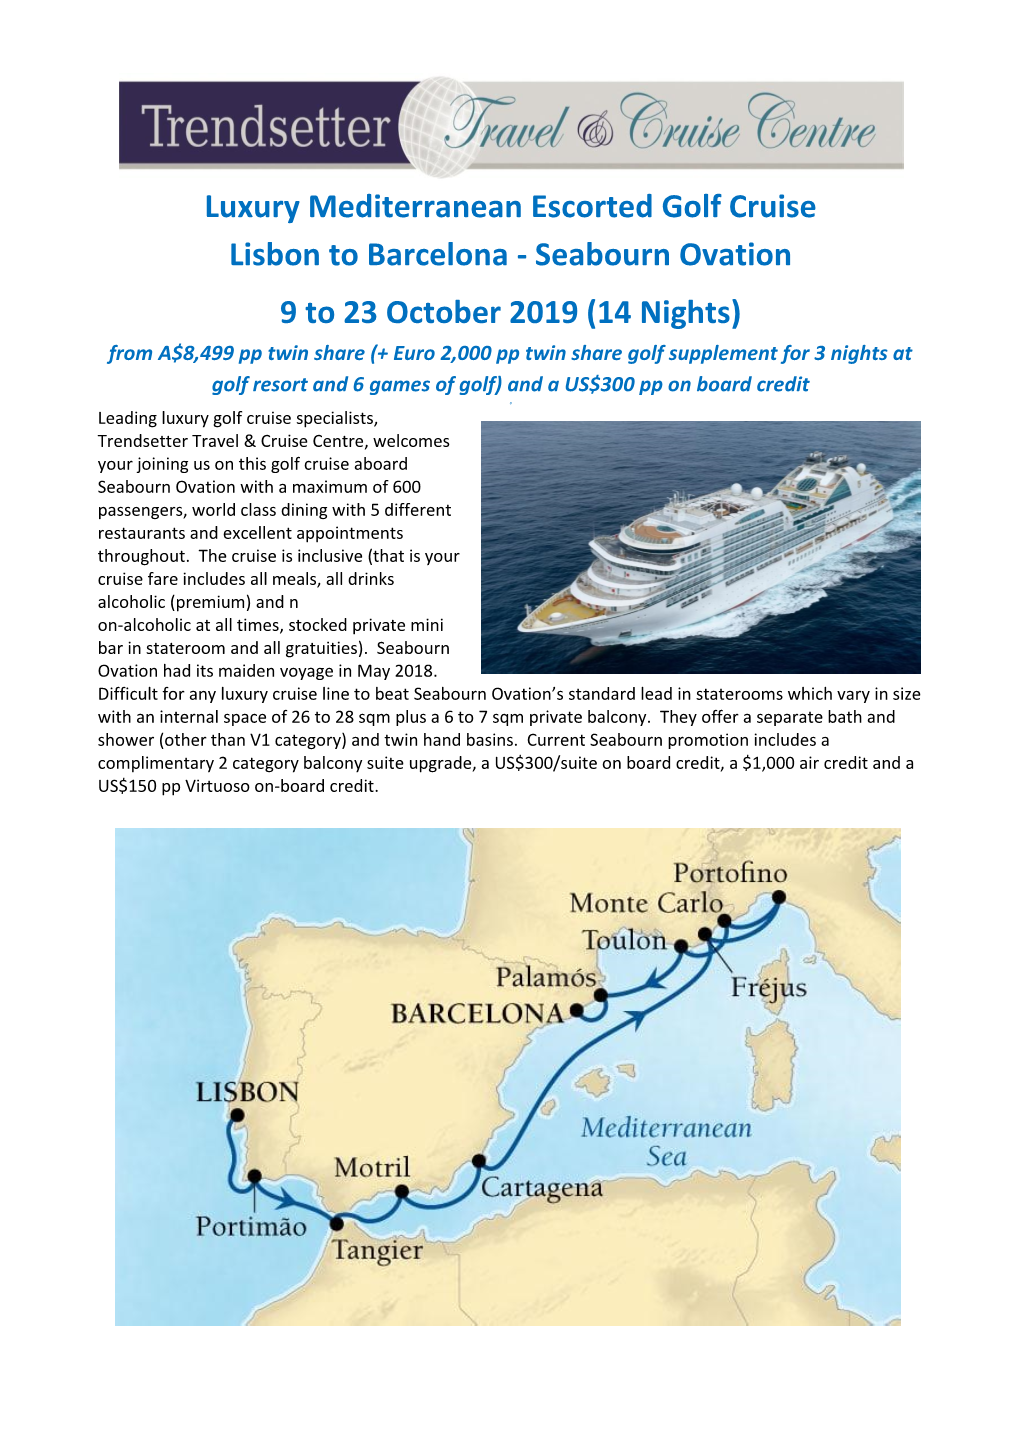 Seabourn Ovation 9 to 23 October 2019 (14 Nights)